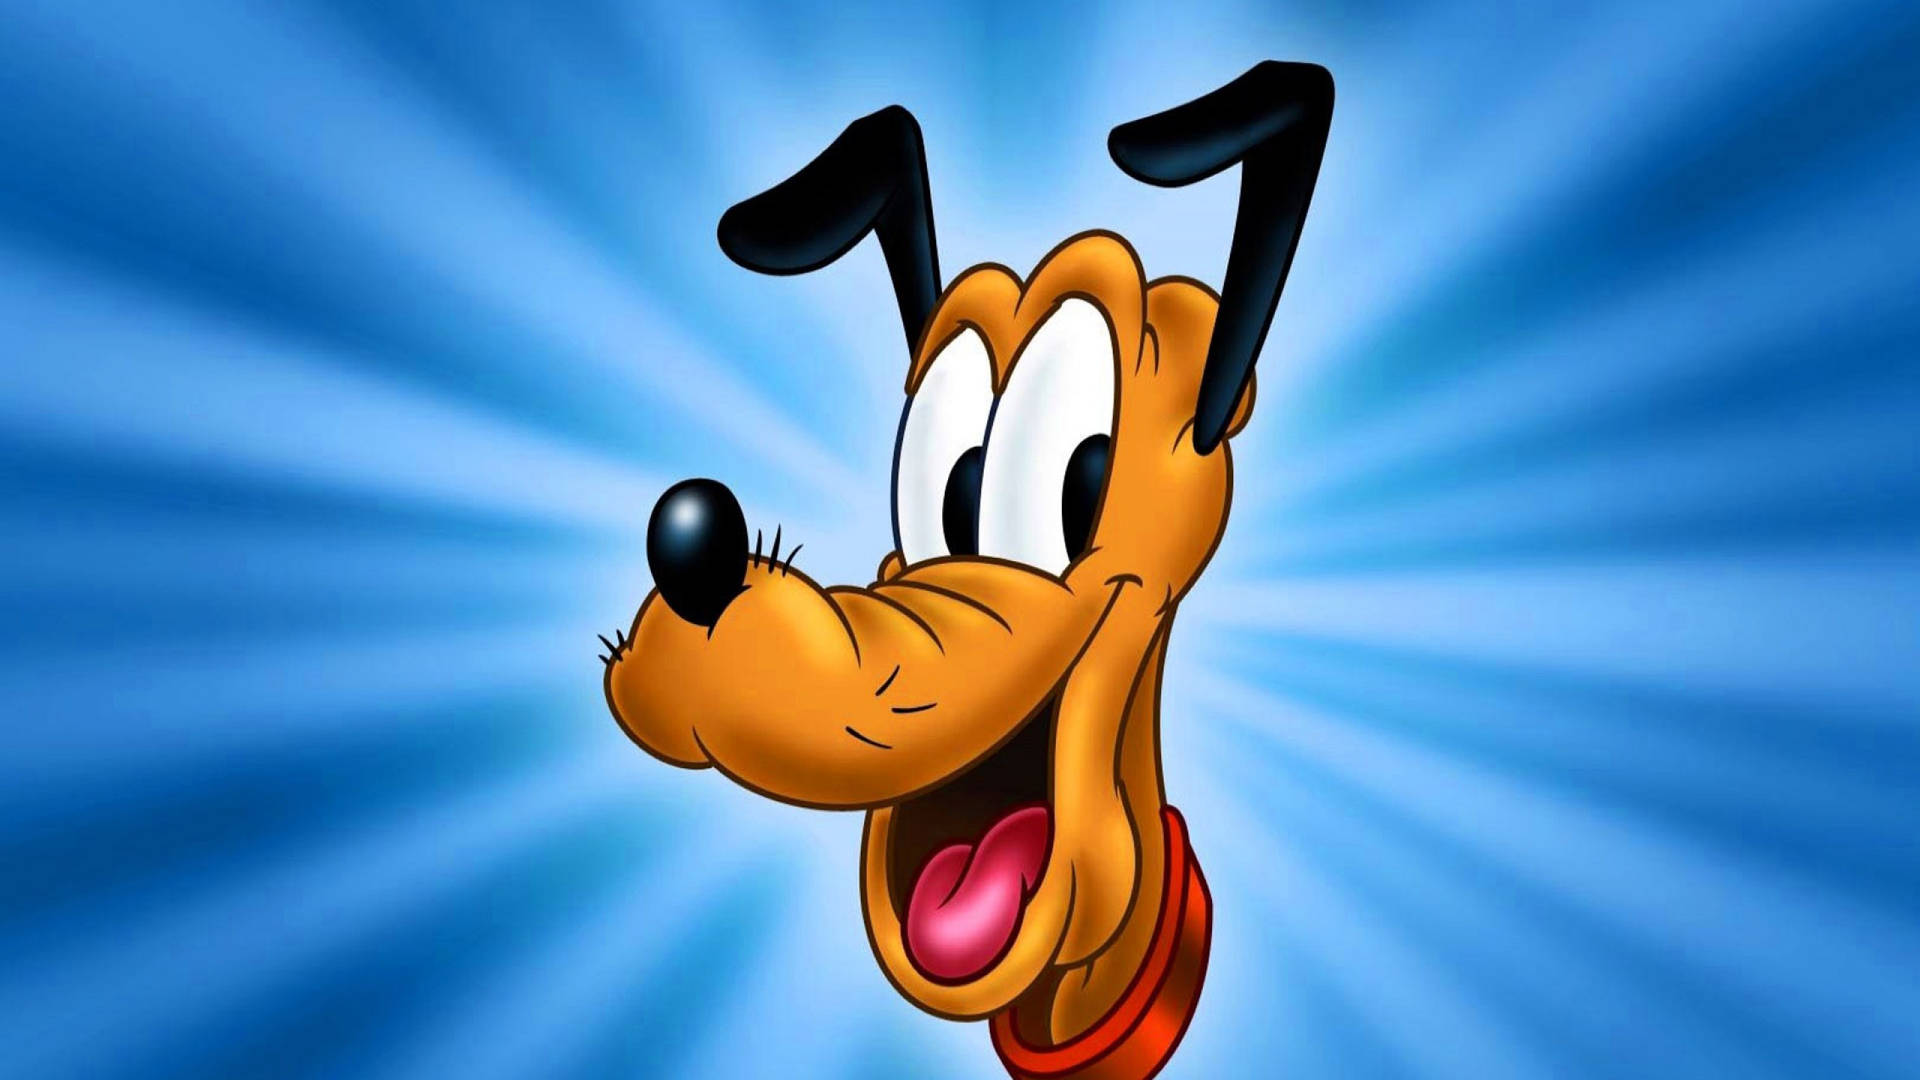 Disneypluto Blue Art Would Be Translated To 